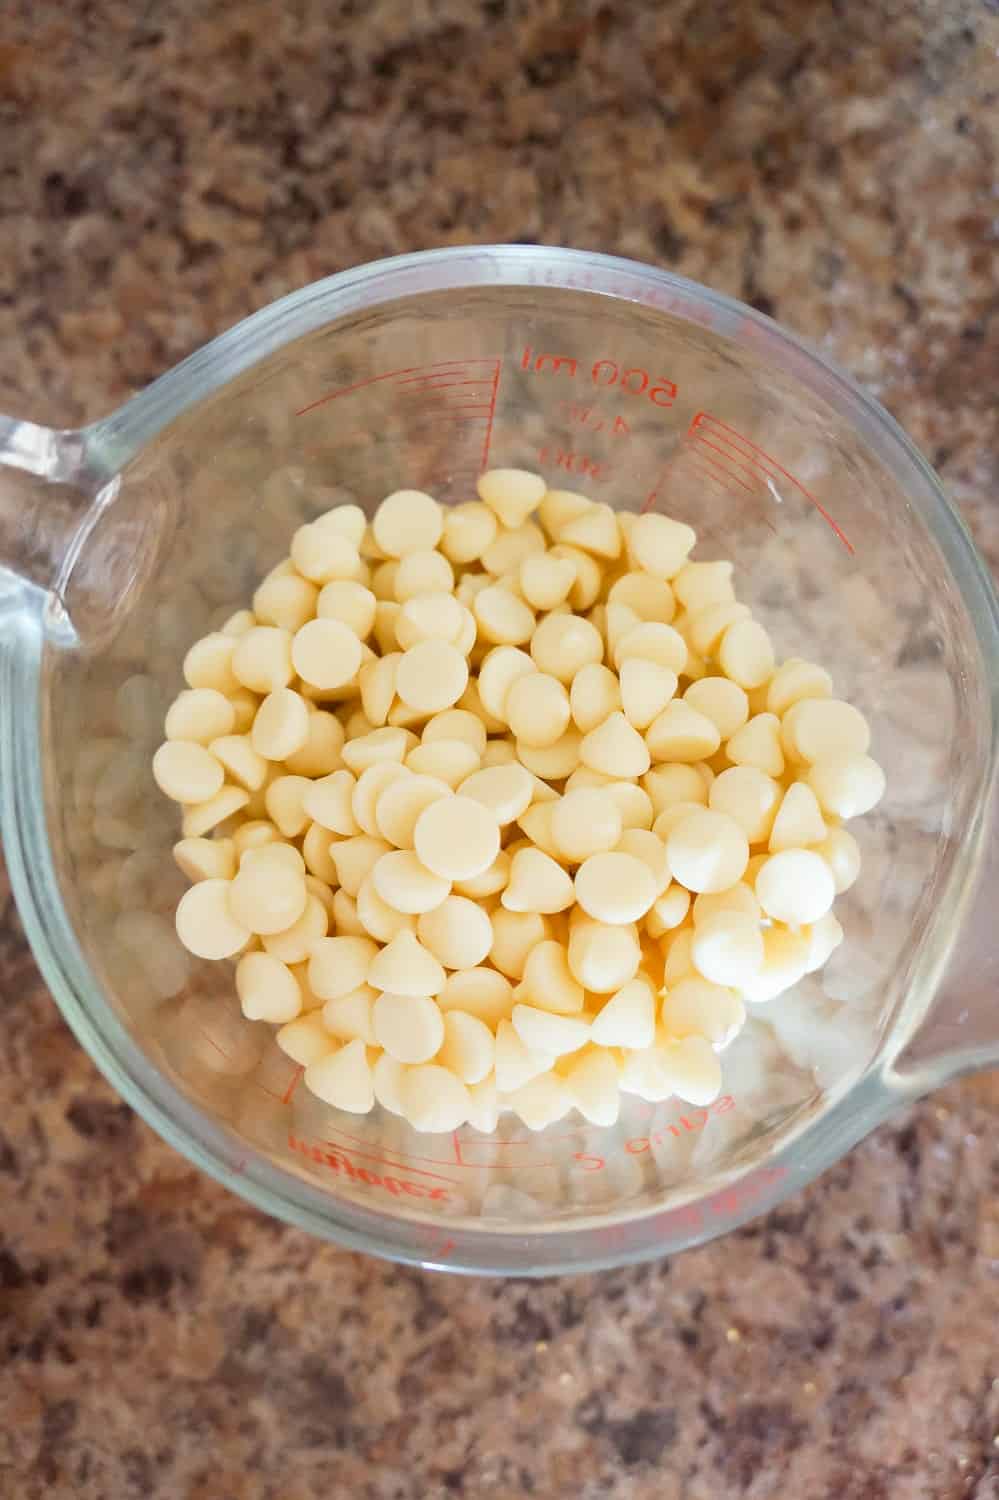 white chocolate baking chips in a glass measuring cup